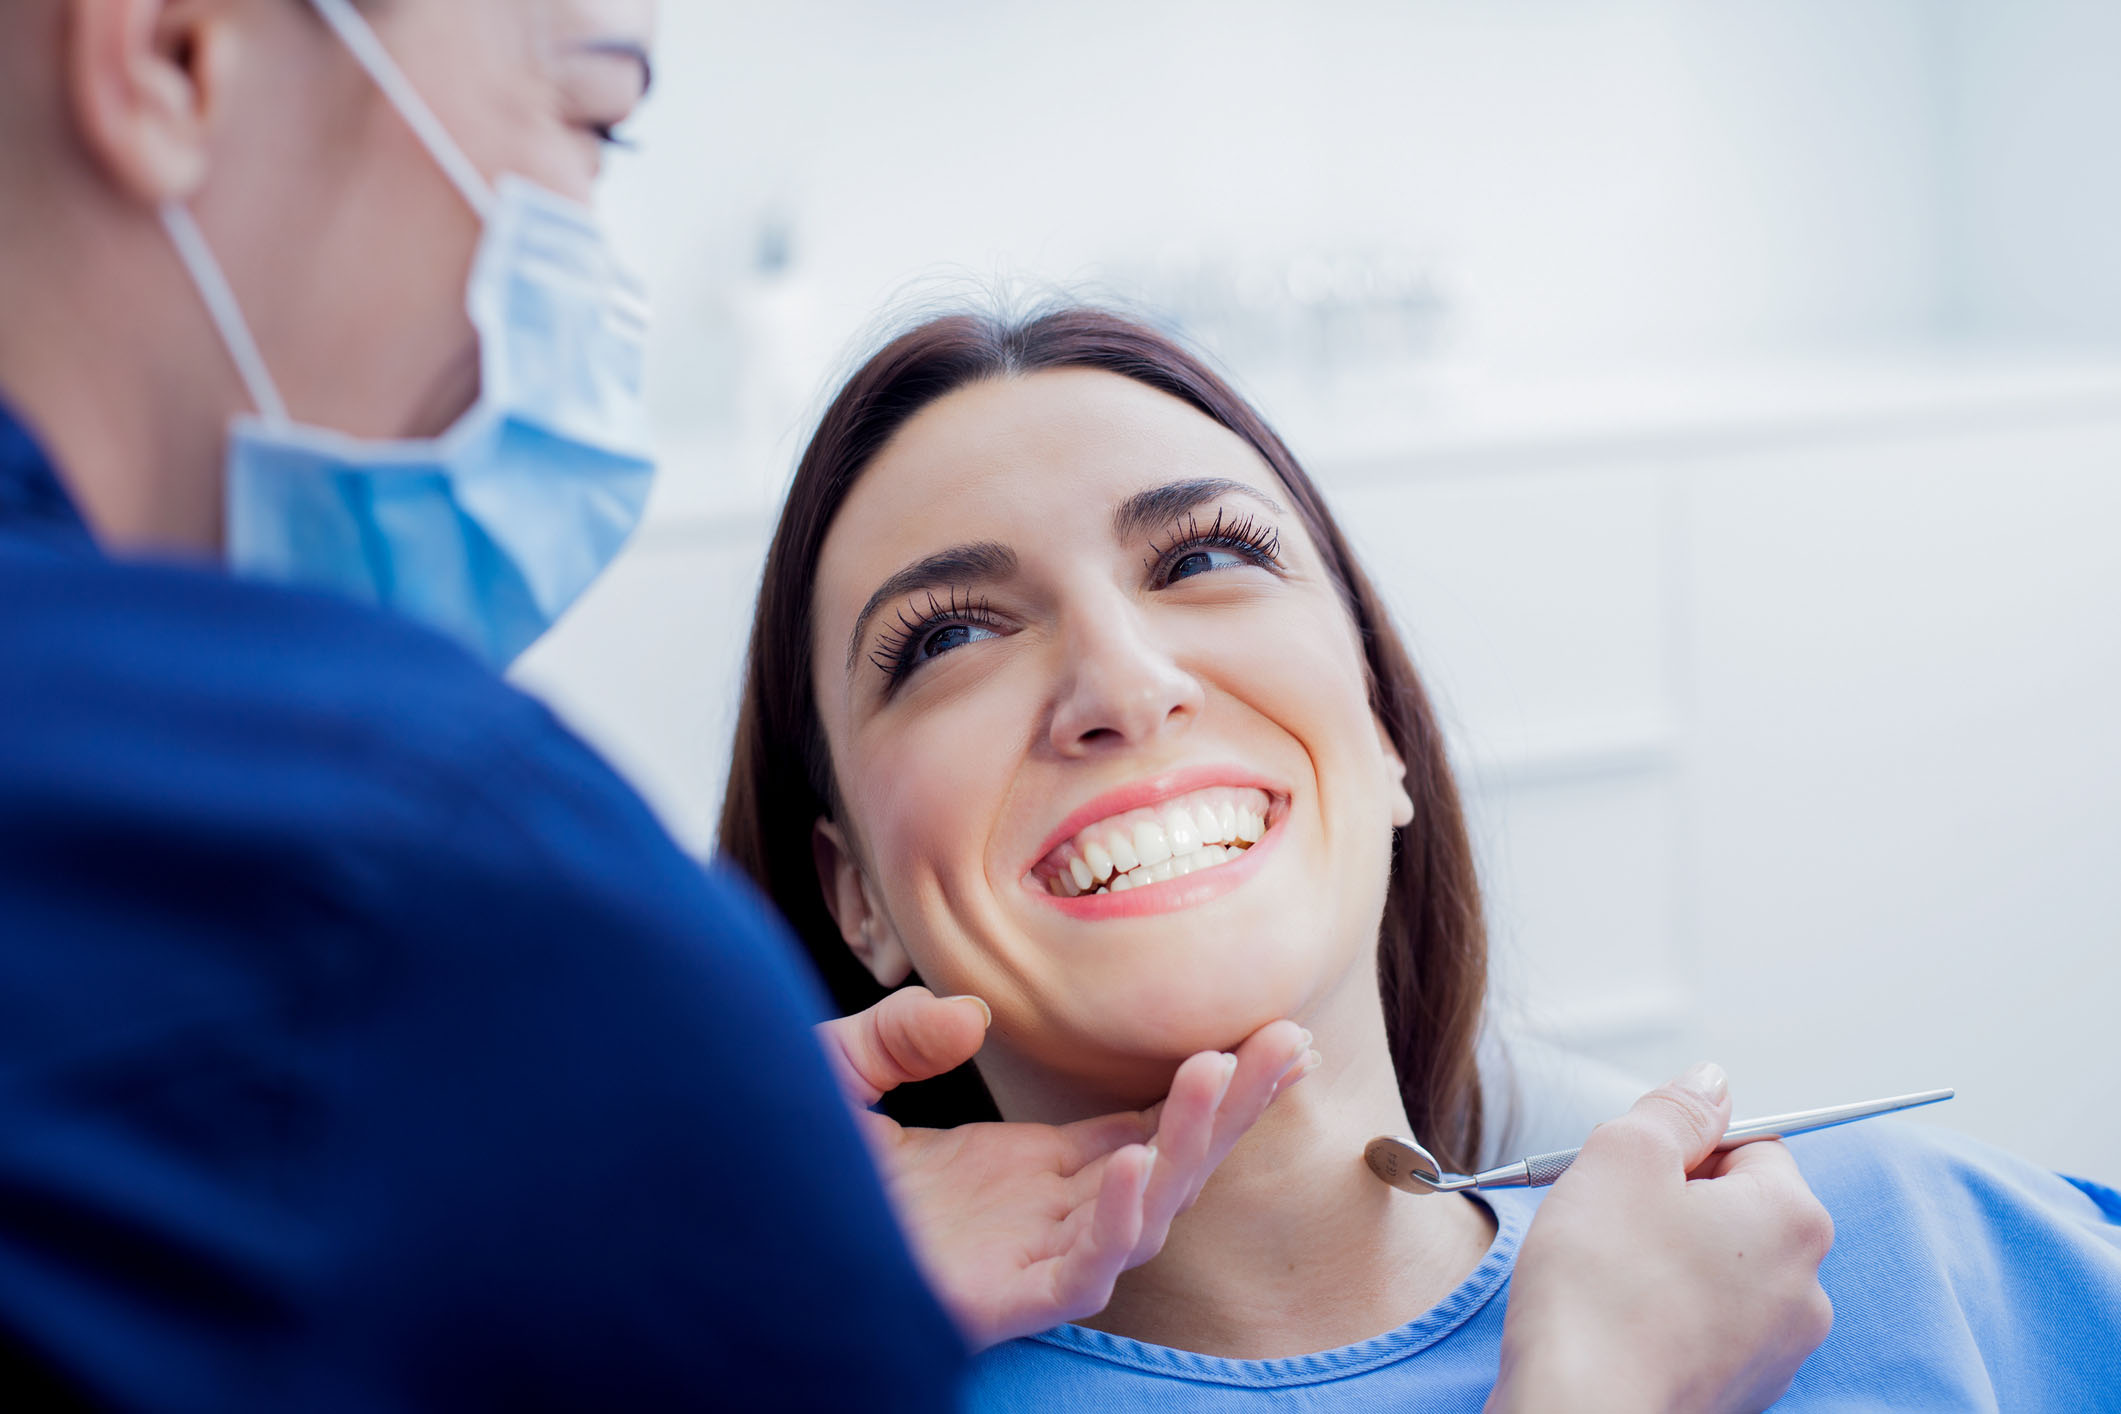 Young female patient smiling as a hygienist cleans her teeth